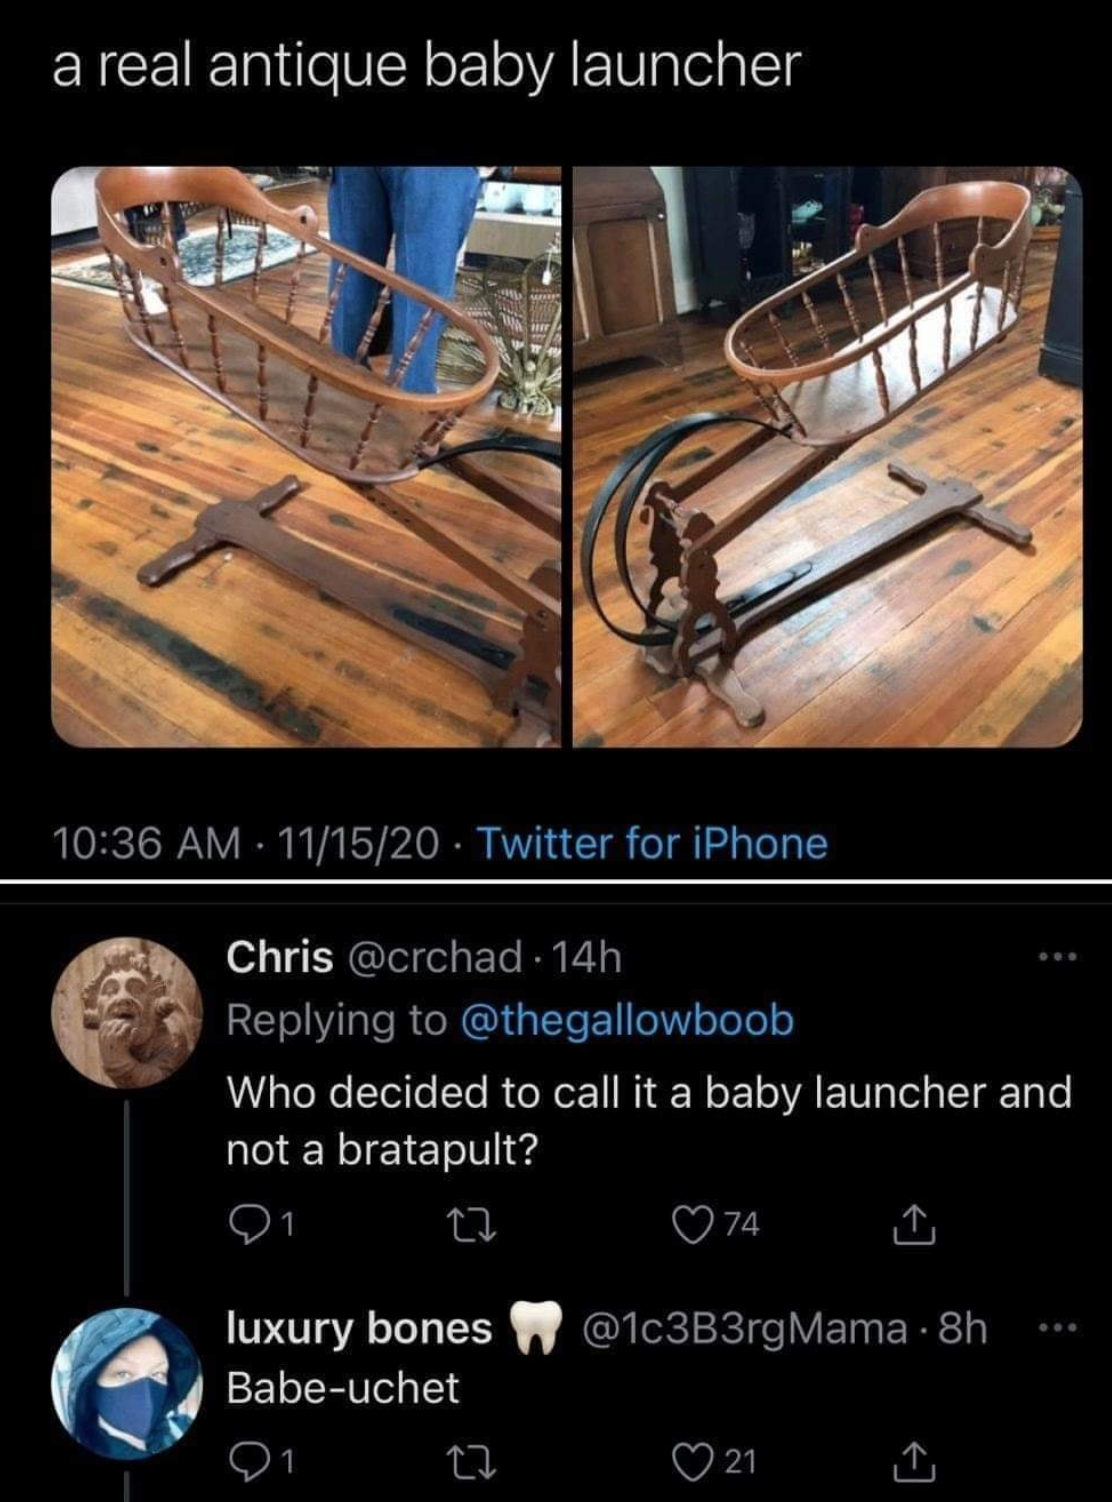 screenshot - a real antique baby launcher 111520 Twitter for iPhone Chris 14h Who decided to call it a baby launcher and not a bratapult? 21 74 luxury bones Mama8h Babeuchet 27 21